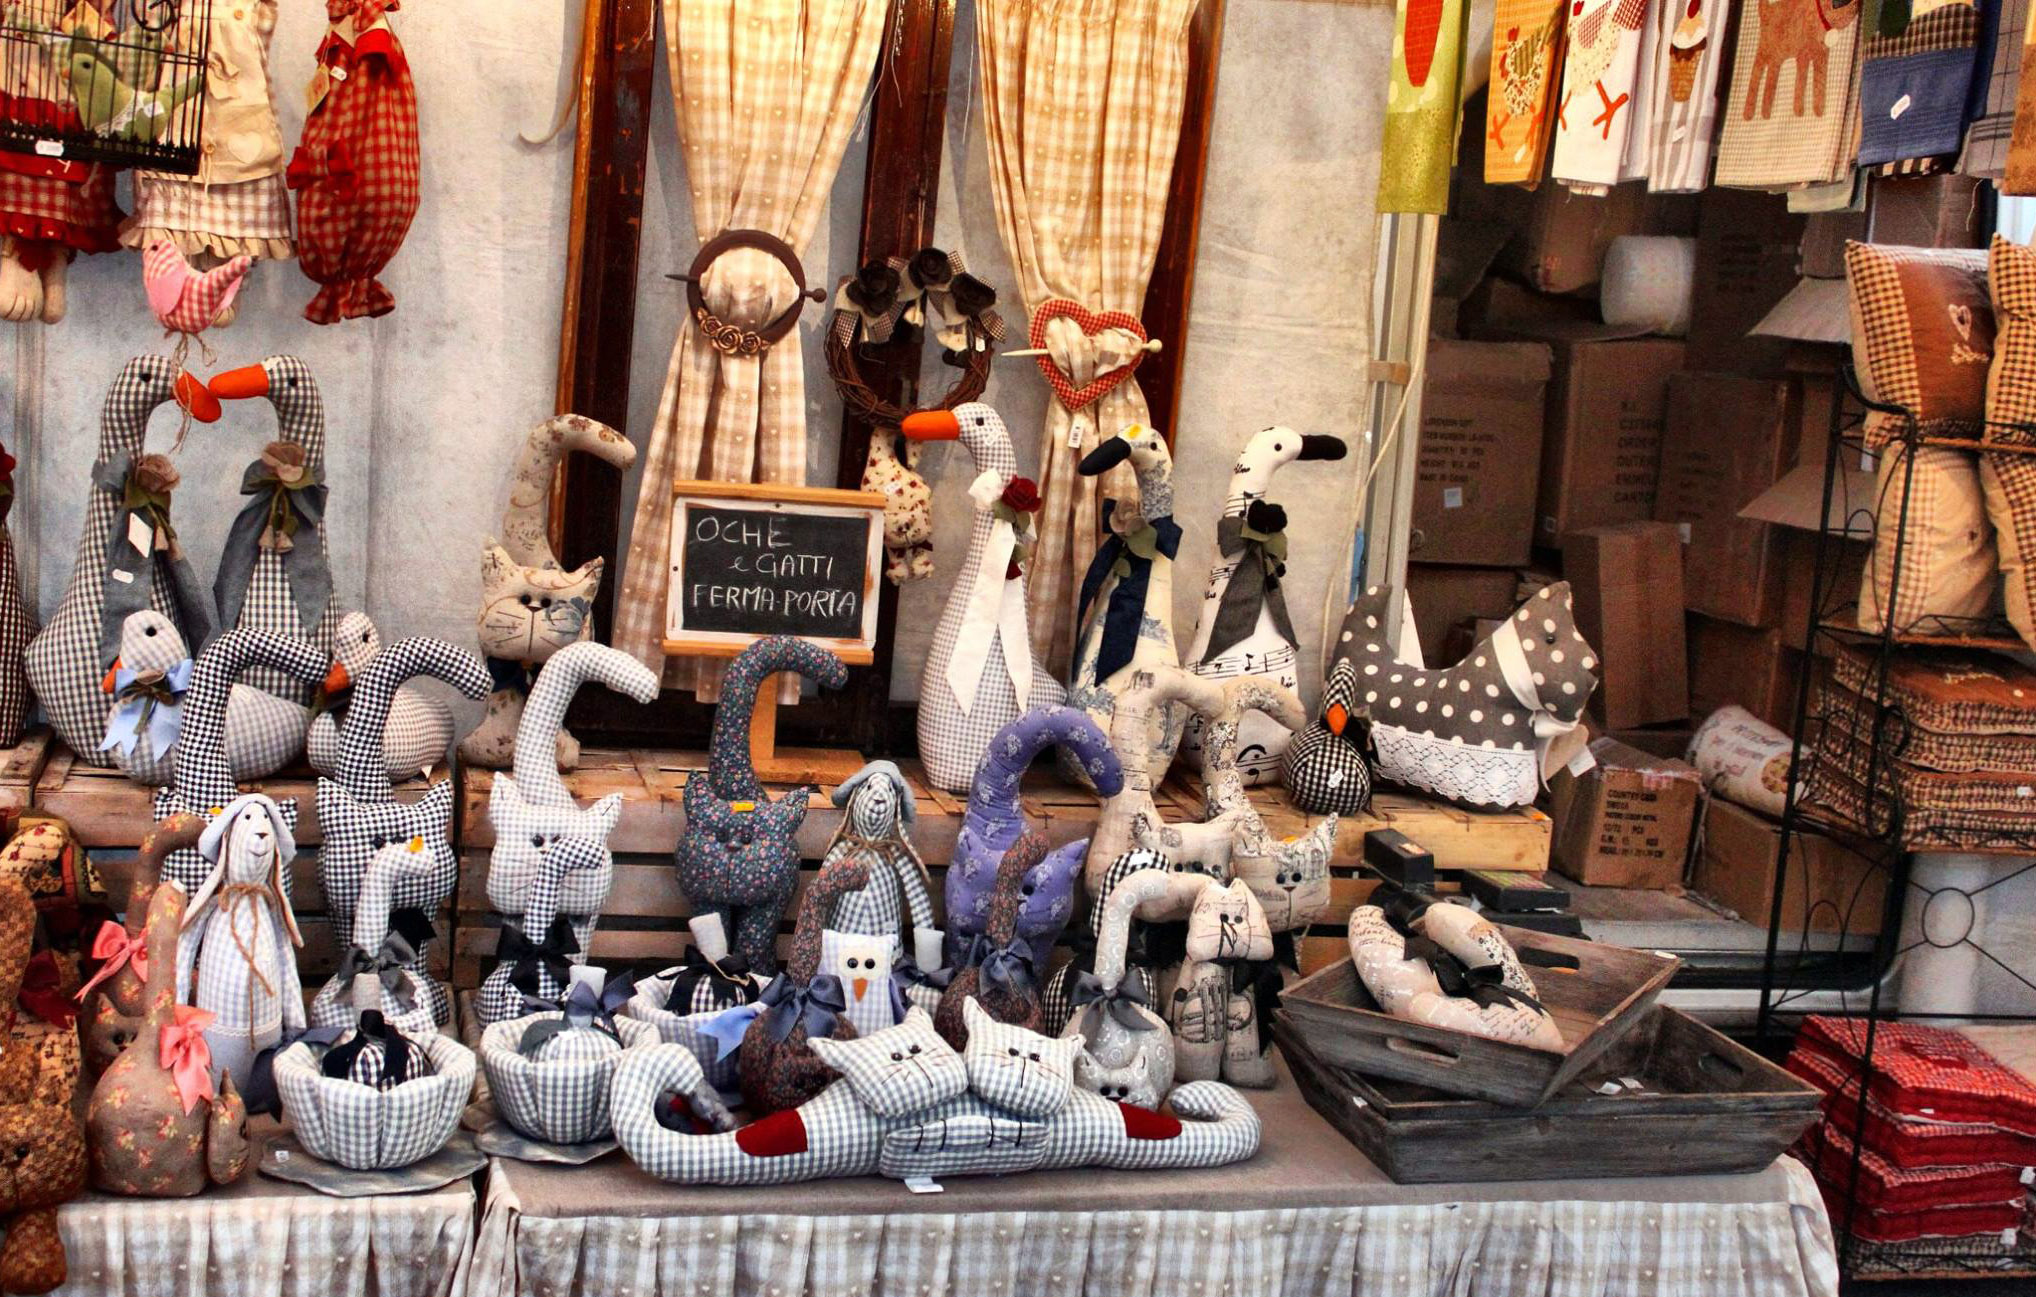 At the European Market of Itinerant Trade, there will be a lot of space to handicraft